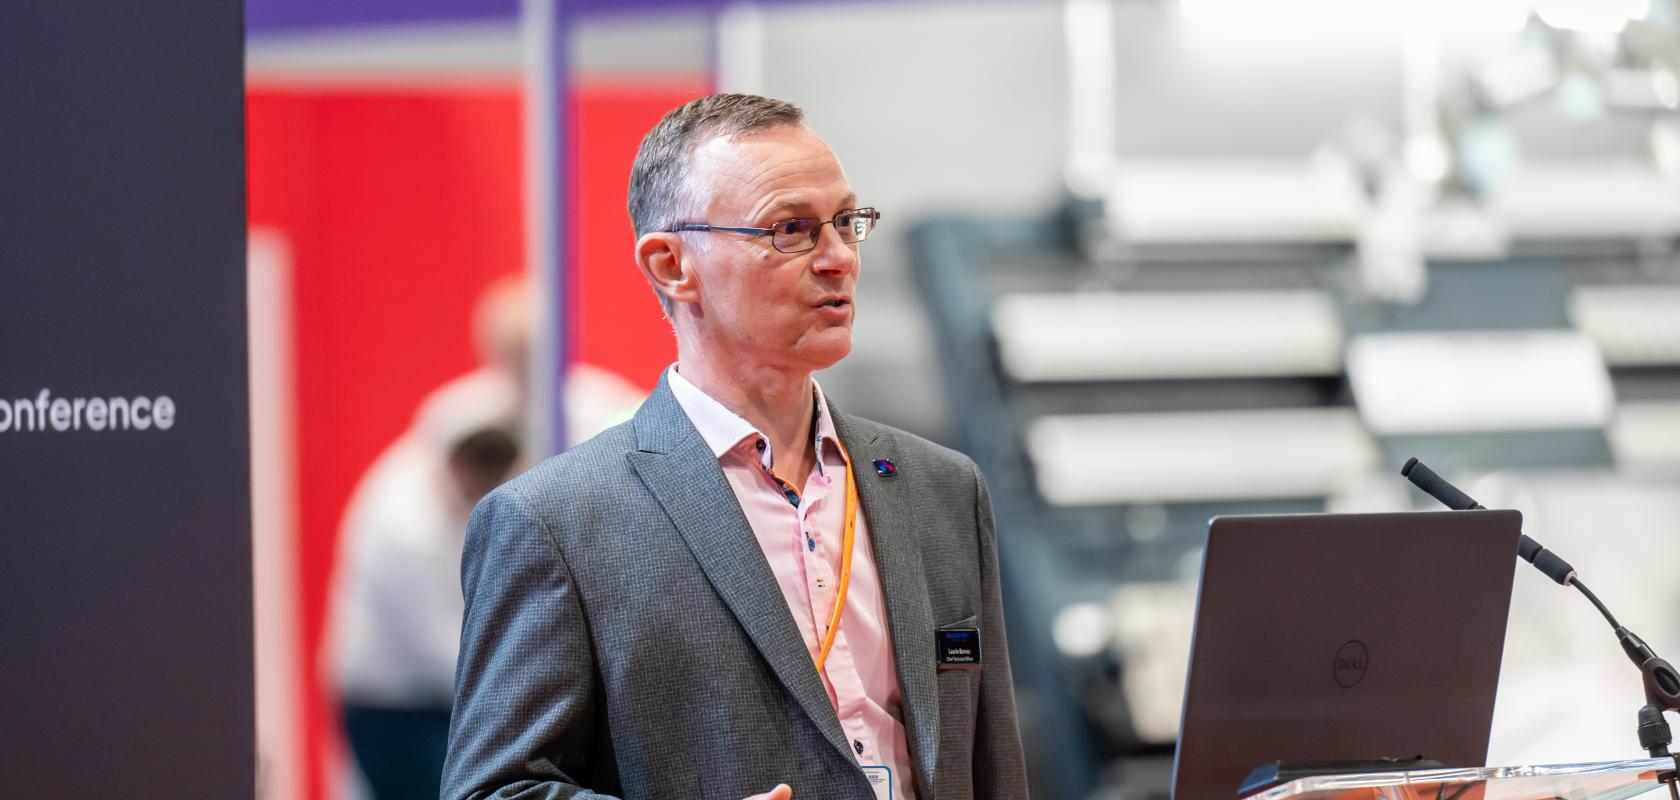 Laurie Barnes, CTO of Automate UK, introduced UKIVA UK's Vision Integrator Standard at the Machine Vision Conference & Exhibition, along with the first two vision integrators to sign up, Acrovision and Scorpion Vision